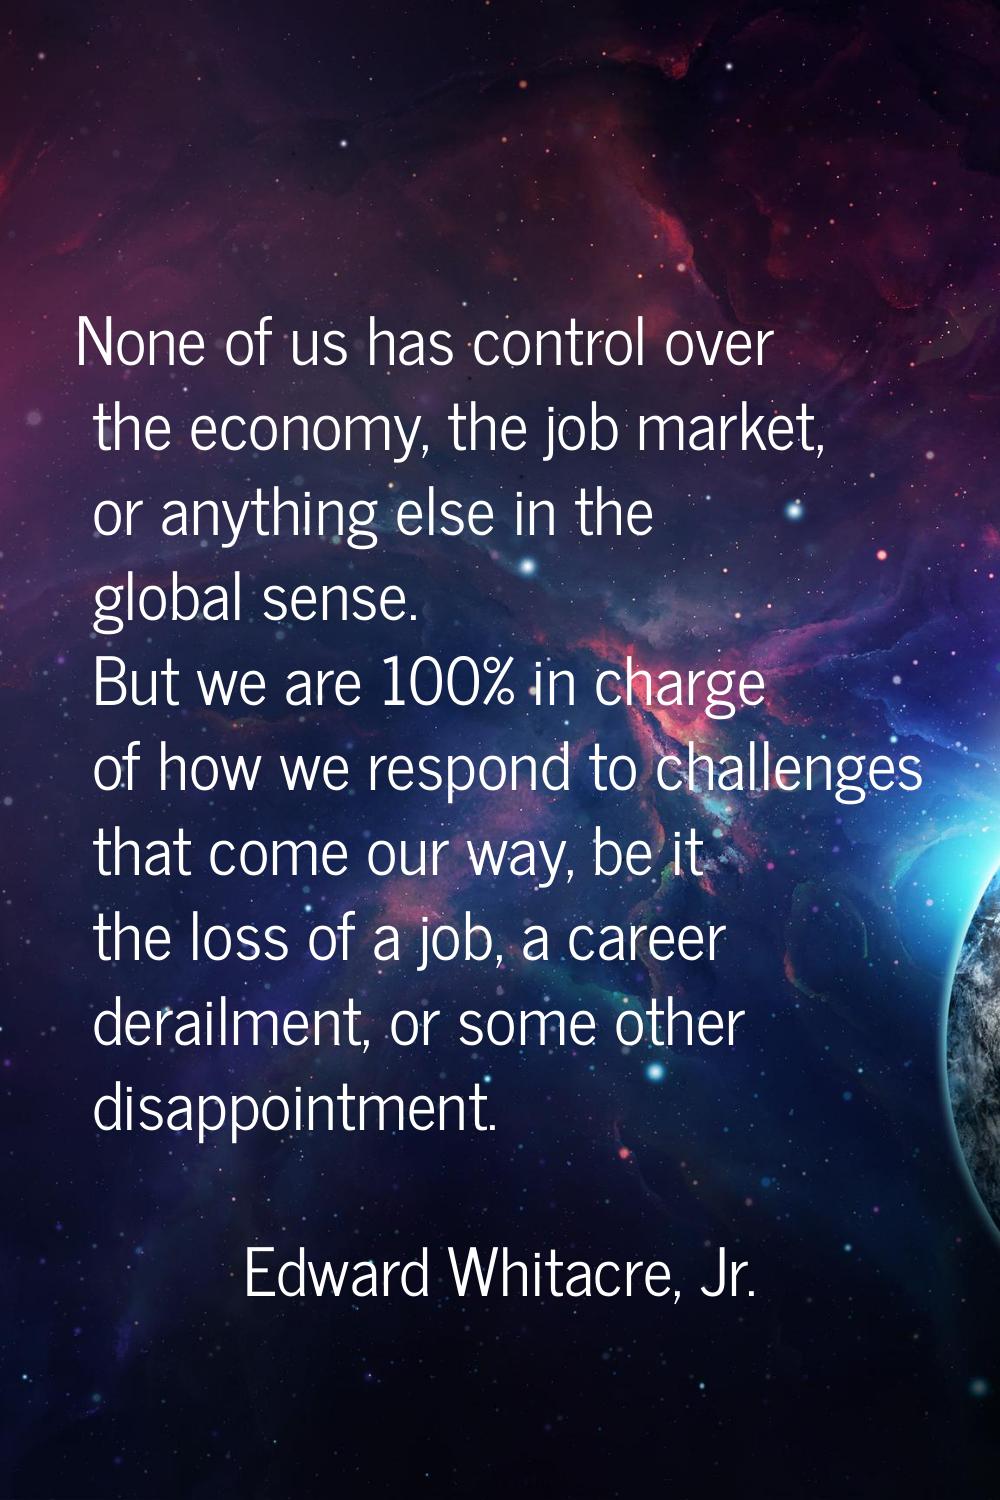 None of us has control over the economy, the job market, or anything else in the global sense. But 